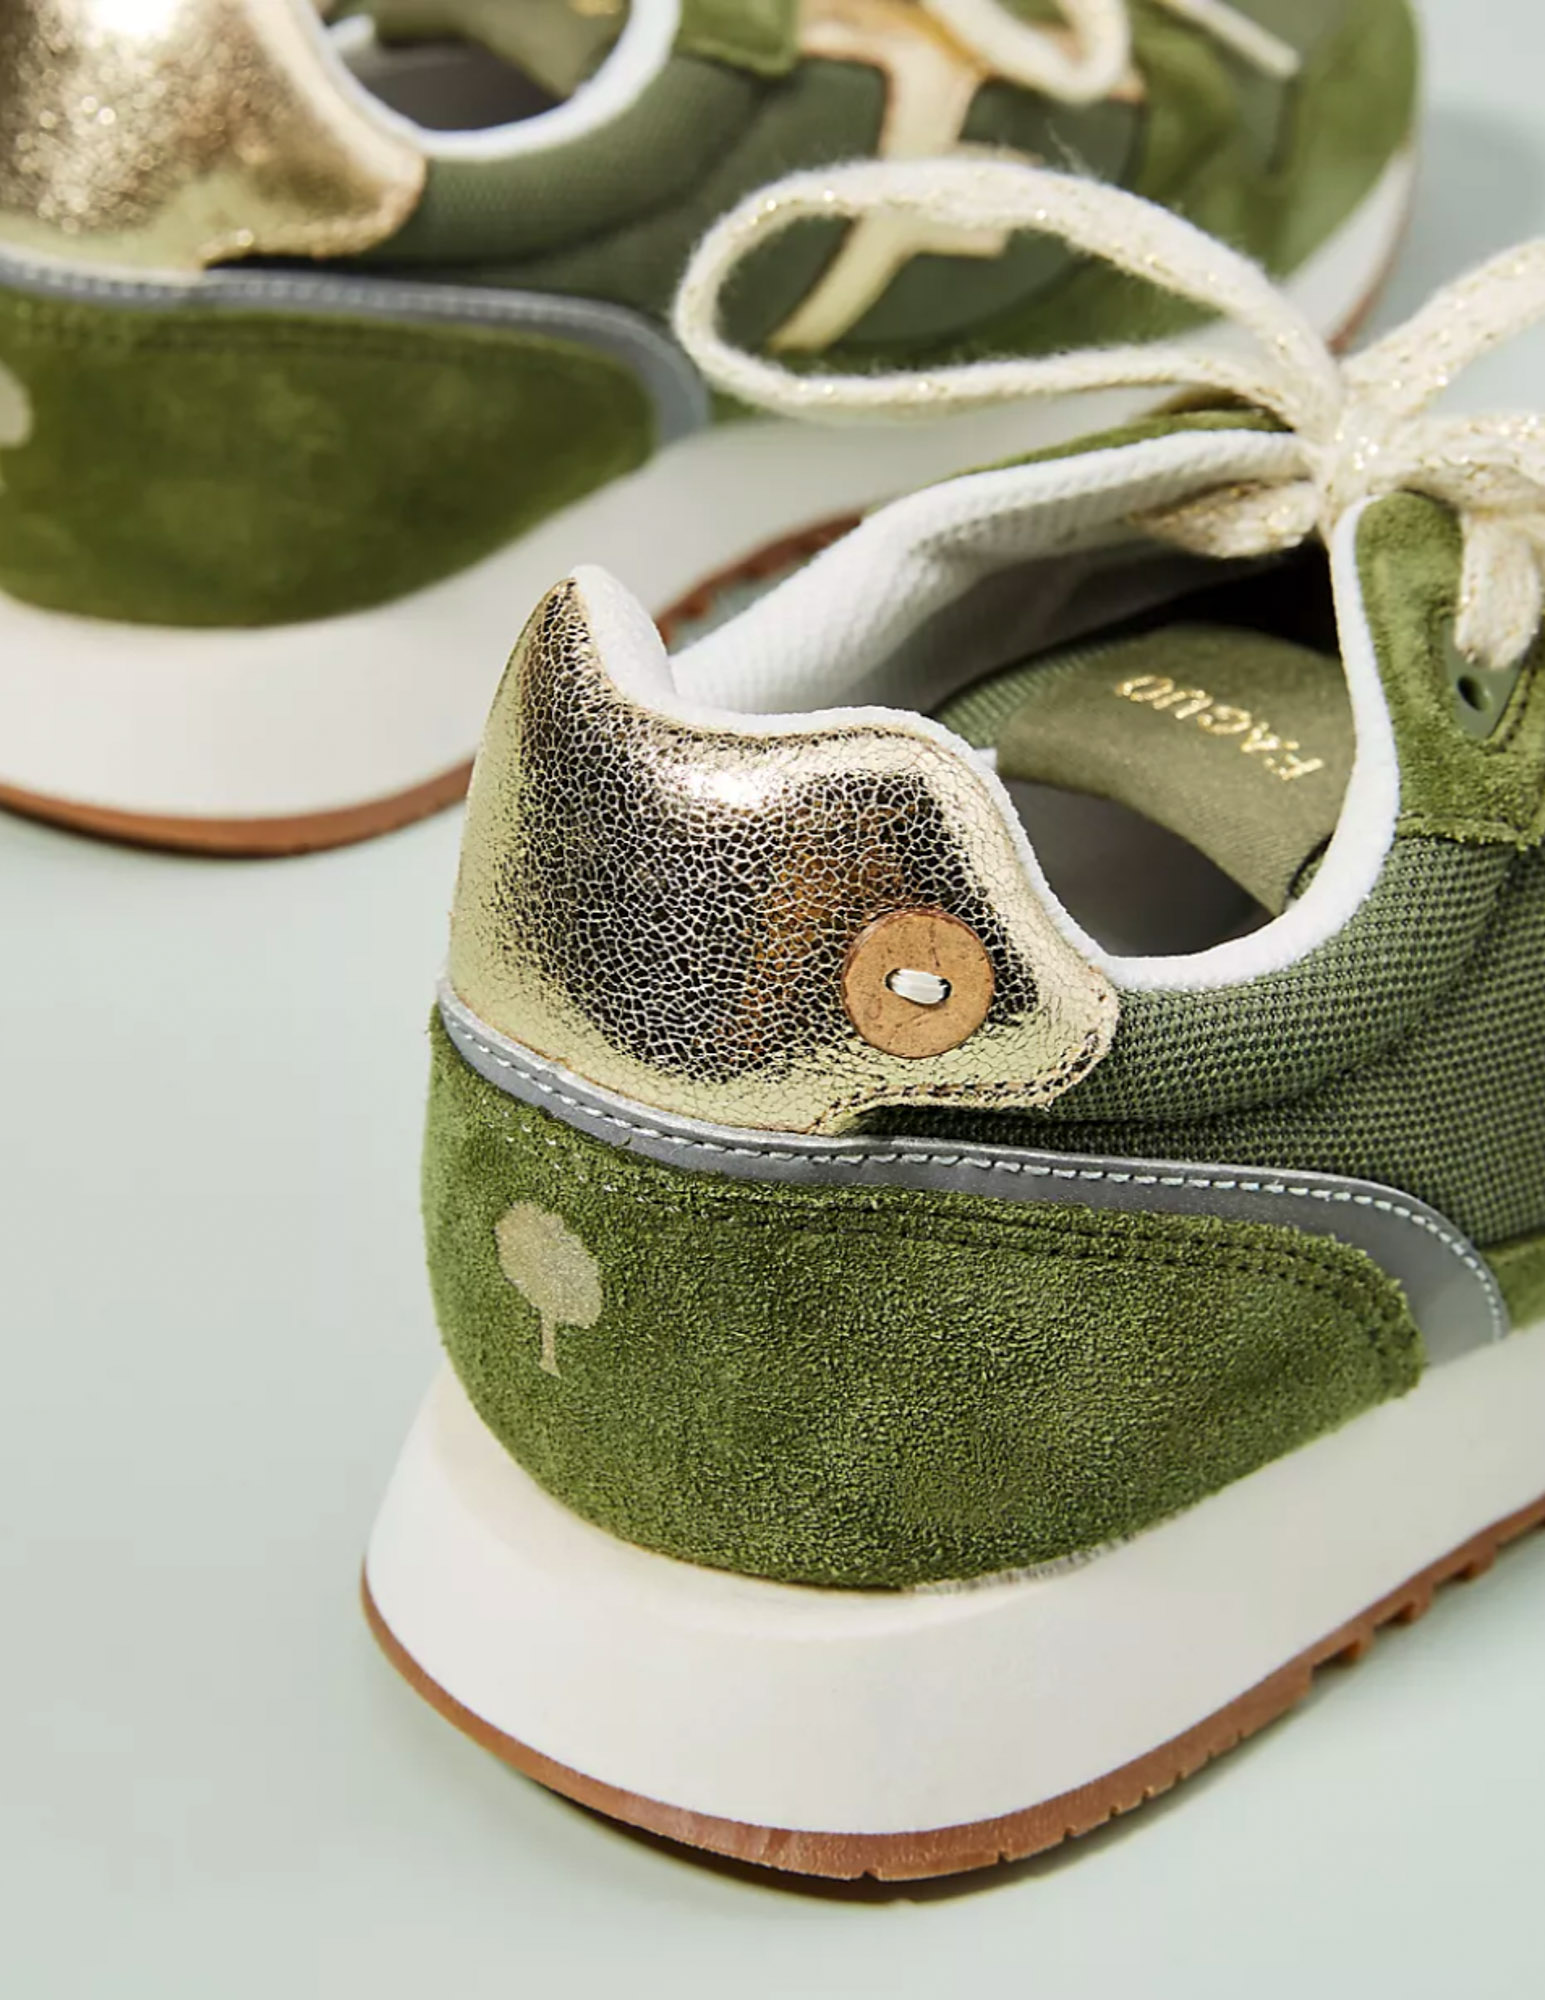 Fuego retro sneakers in green at Anthropologie